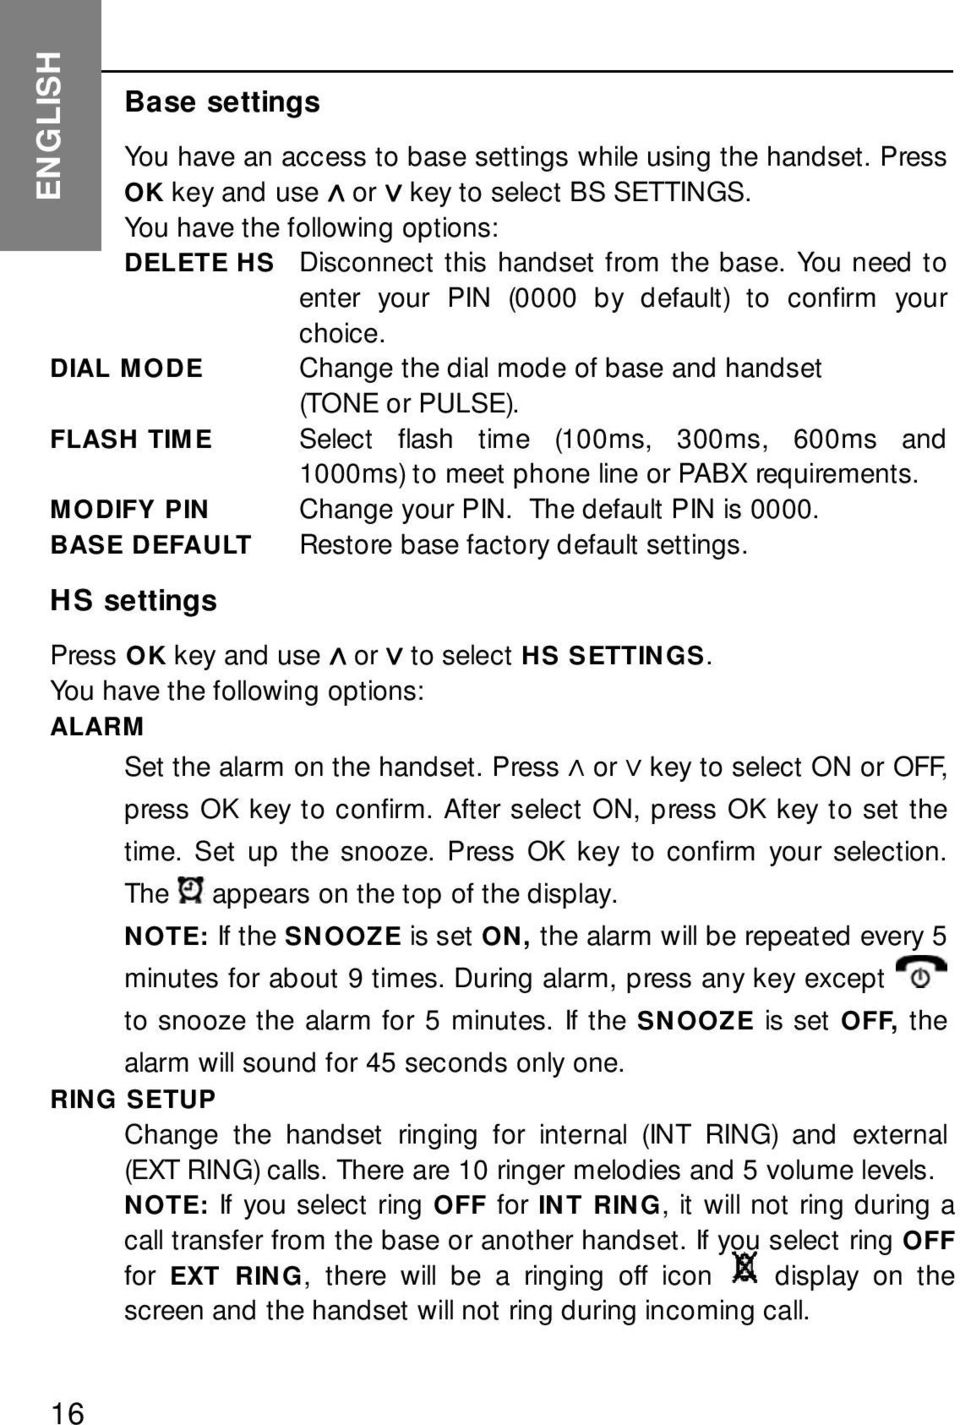 DIAL MODE Change the dial mode of base and handset (TONE or PULSE). FLASH TIME Select flash time (100ms, 300ms, 600ms and 1000ms) to meet phone line or PABX requirements. MODIFY PIN Change your PIN.